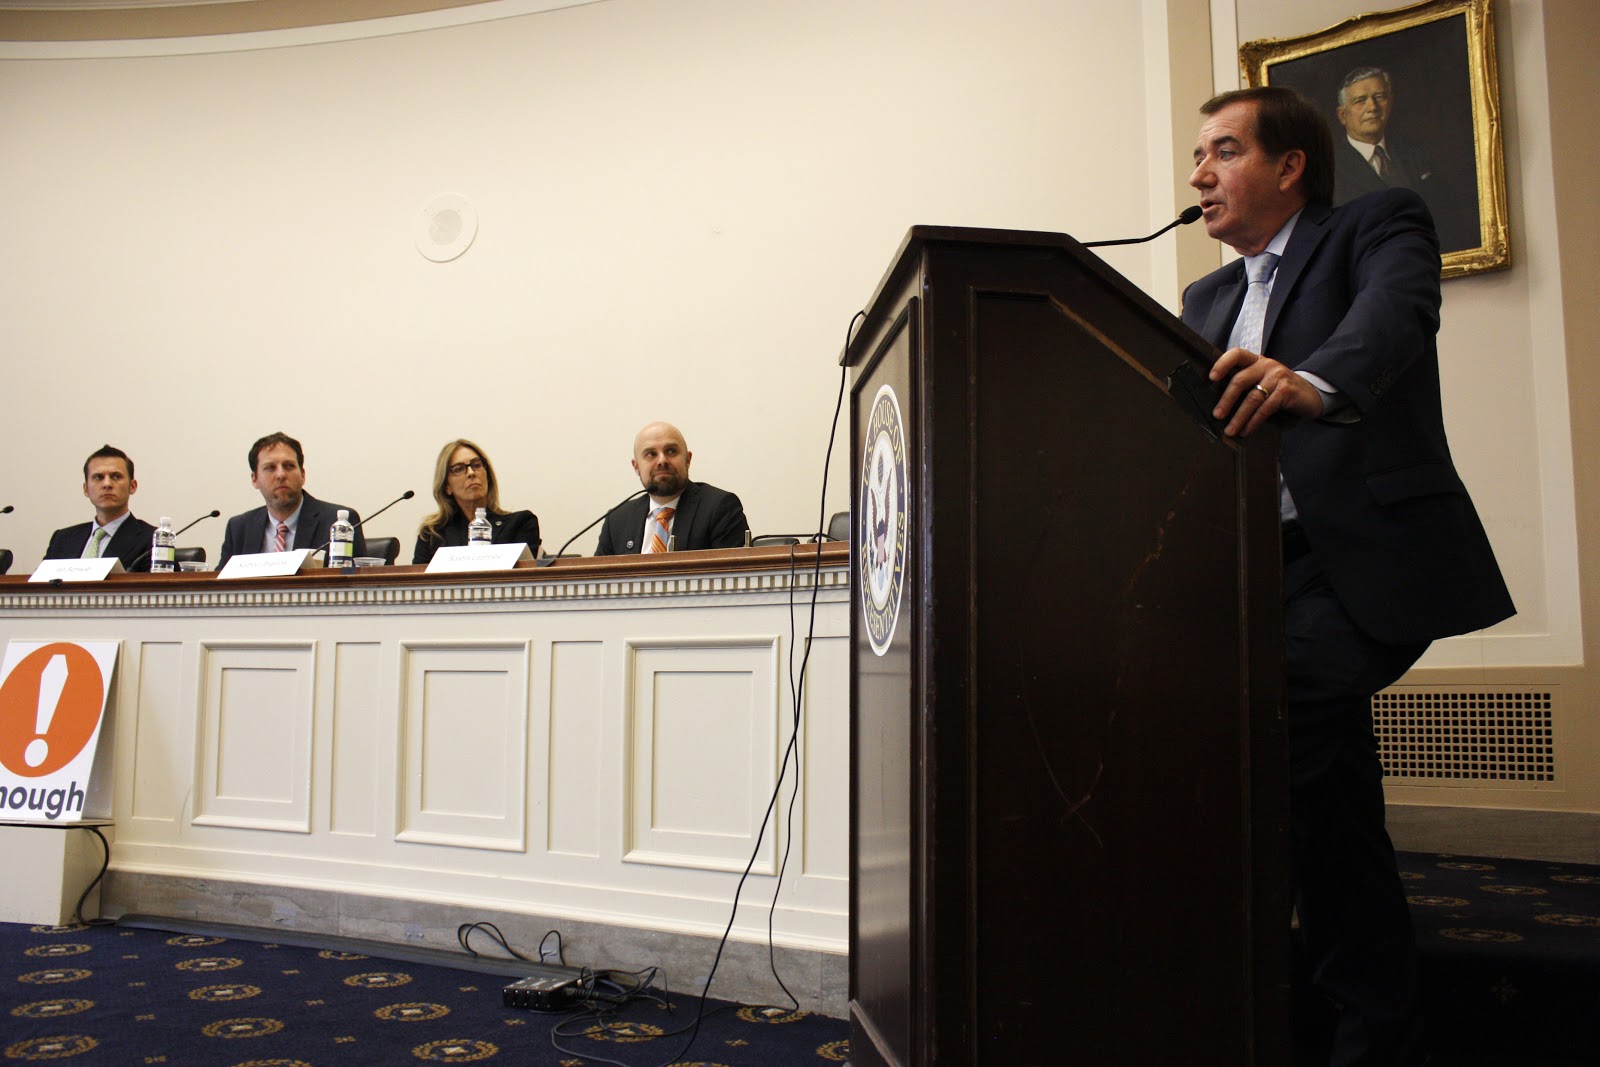 Chairman Ed Royce (R-CA) addressing the moral responsibility of the United States Congress to support current legislation promoting efforts to curb wildlife trafficking.